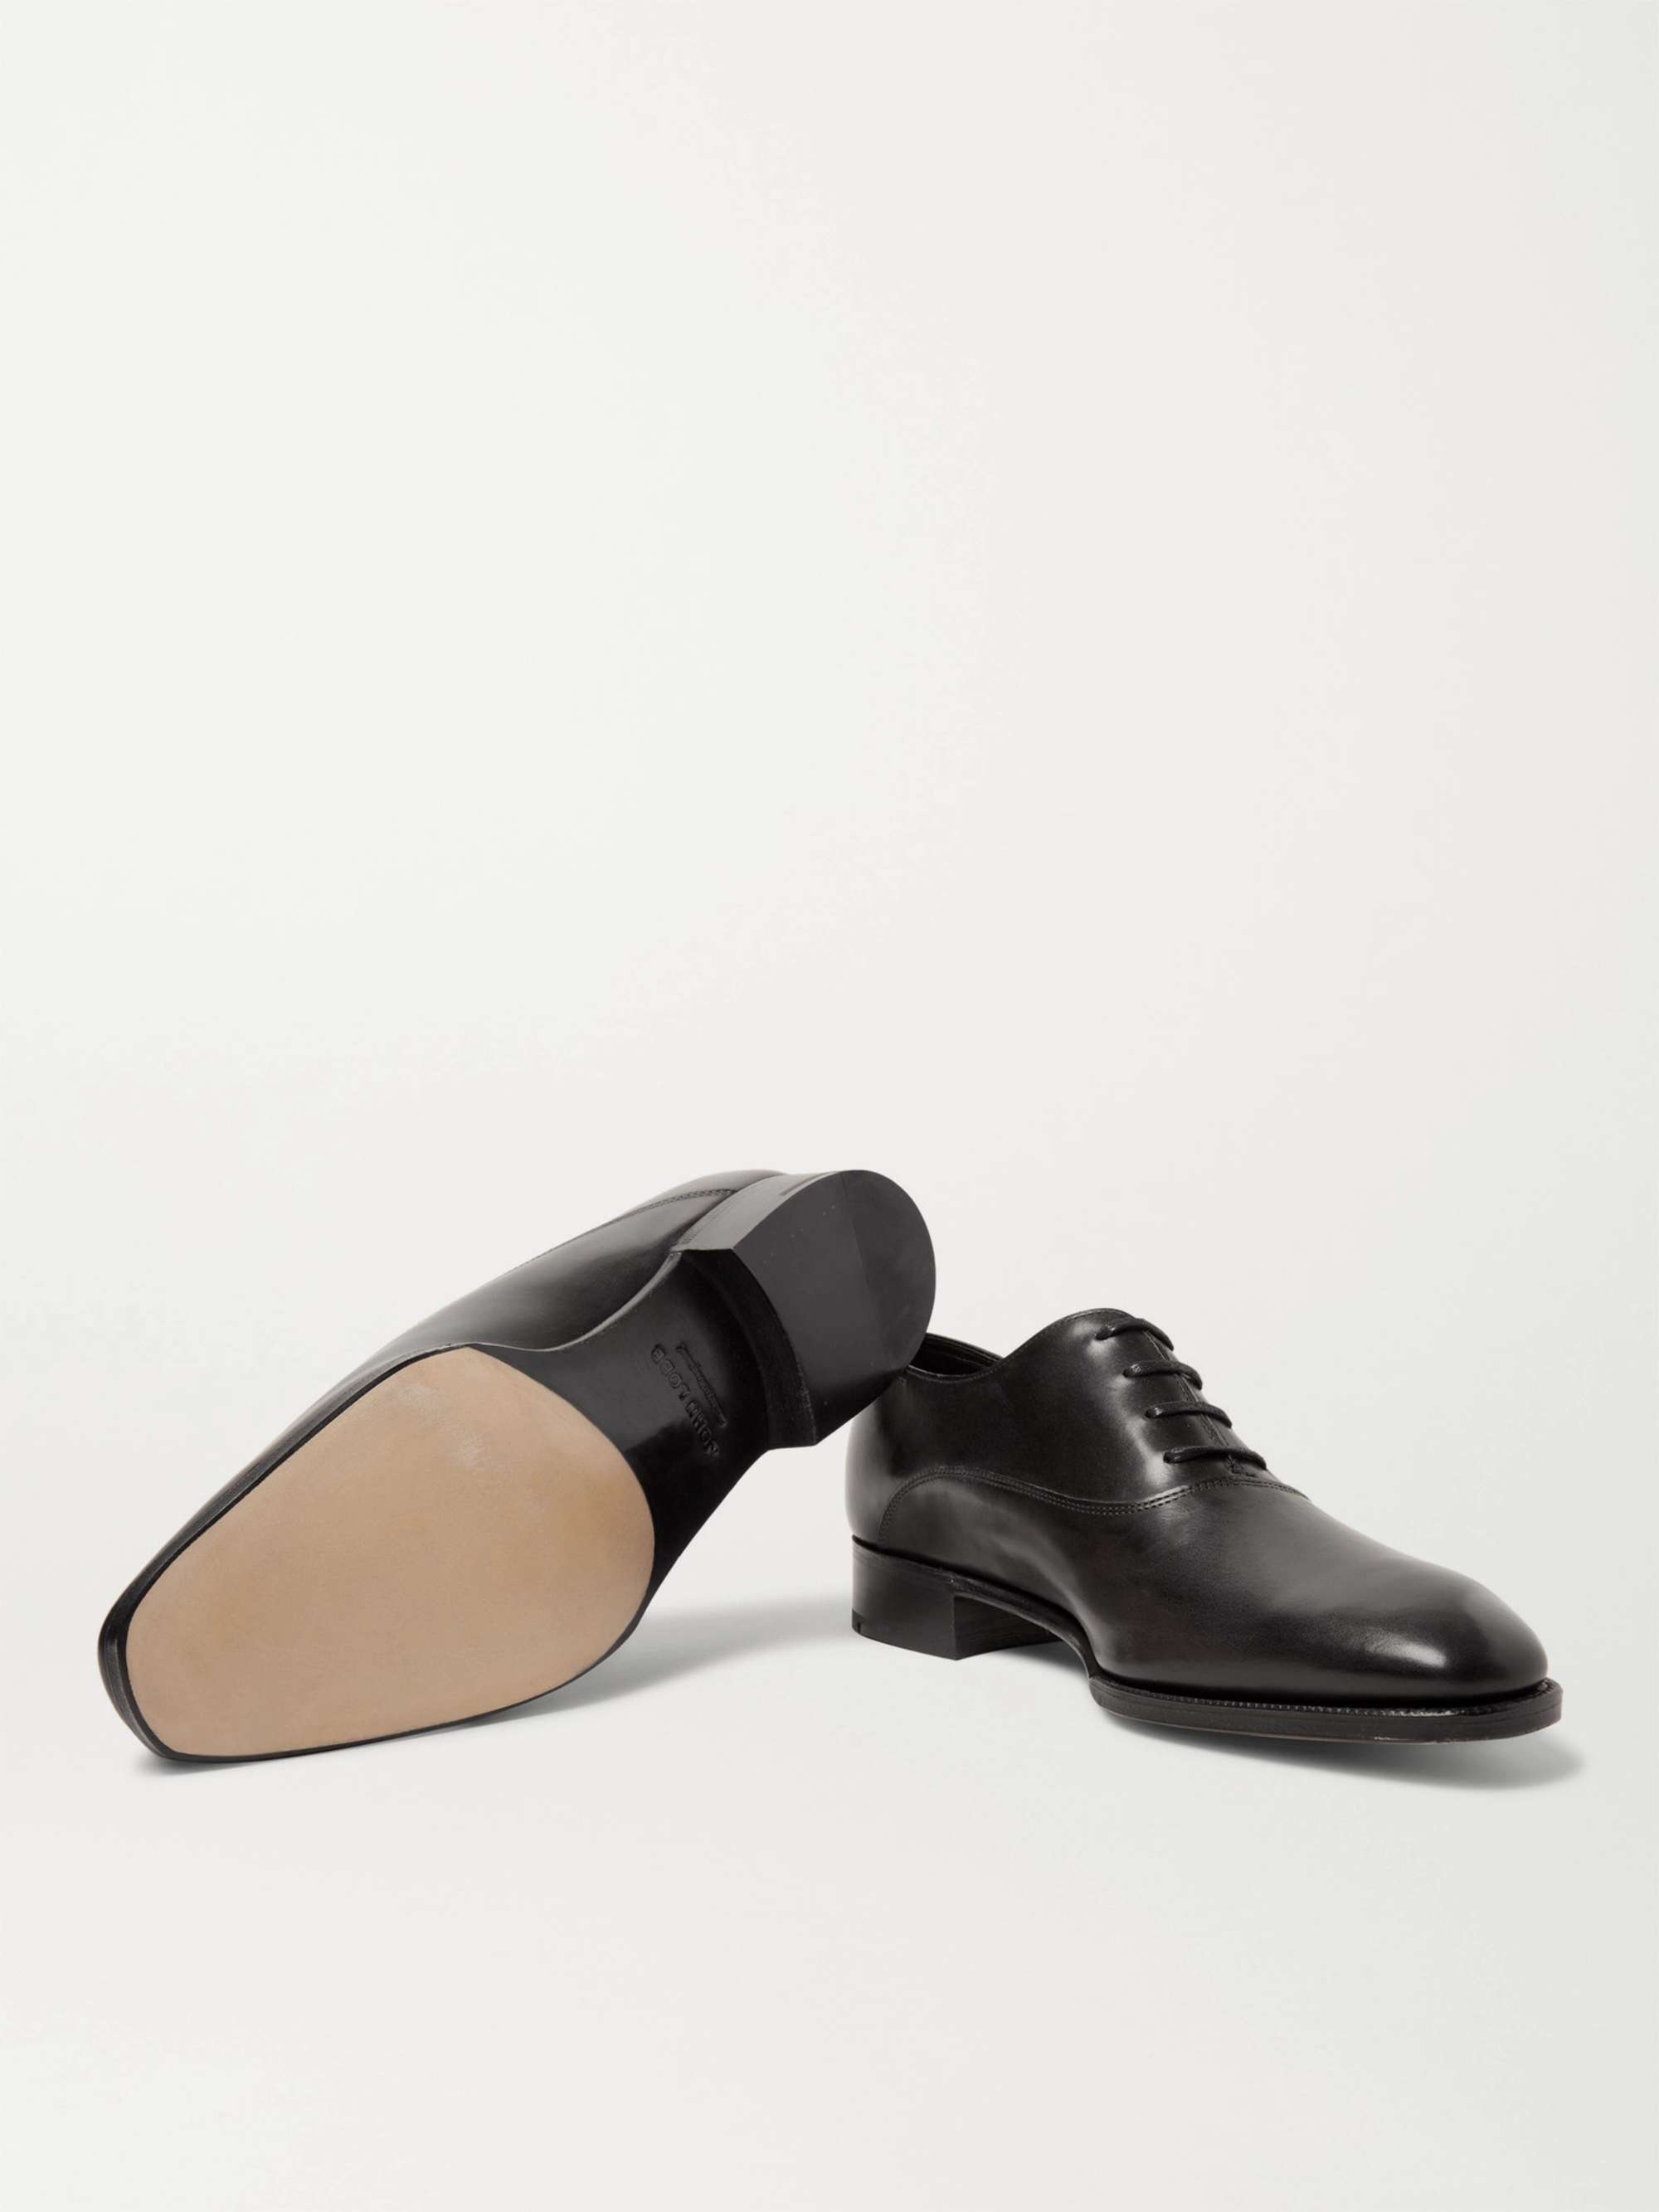 Prestige Becketts Leather Oxford Shoes